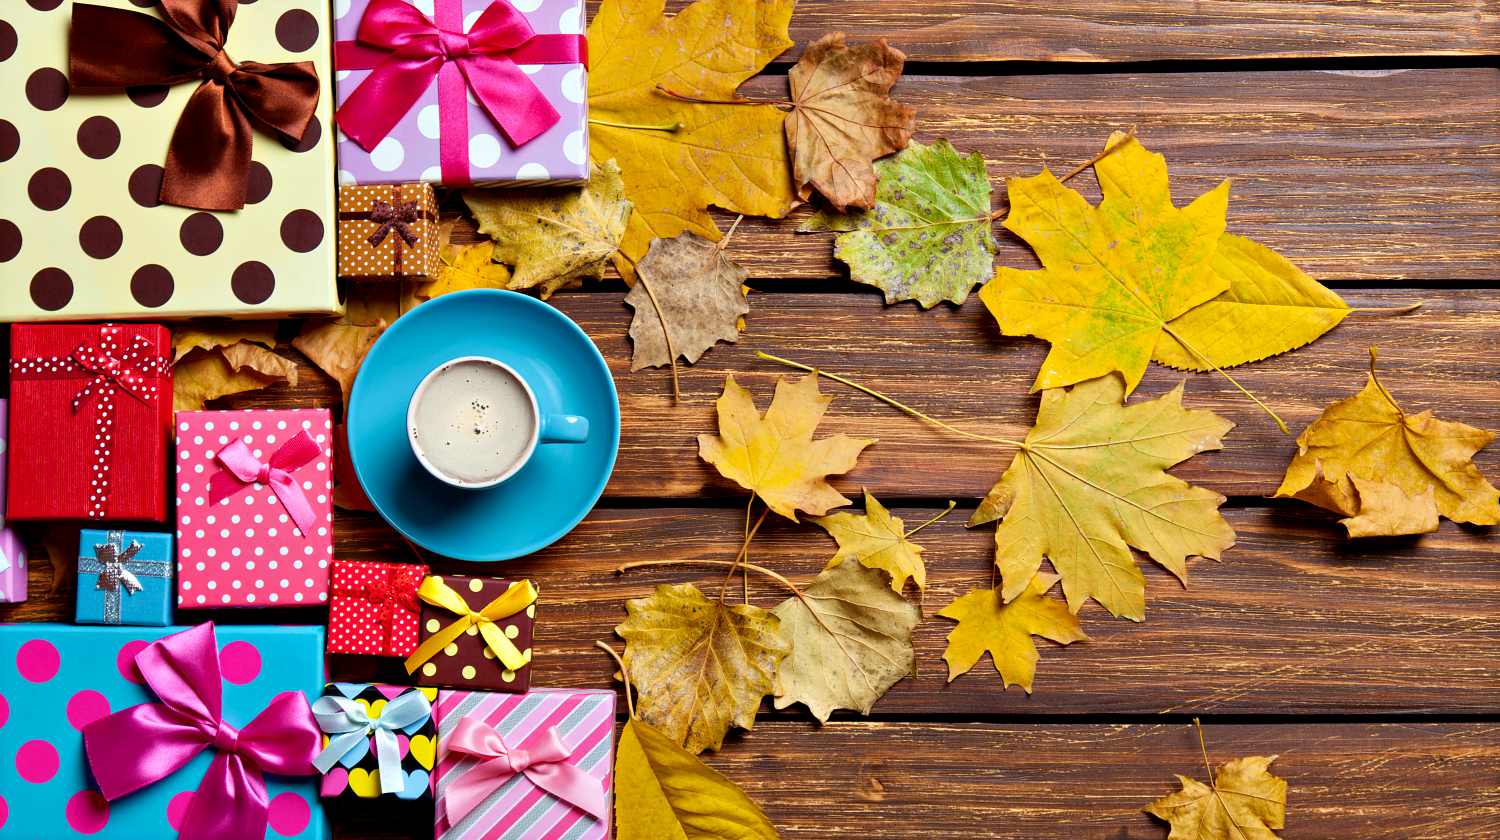 Cup of coffee and season gifts with leaves on wooden background | Awesome Fall Leaf Activities | Featured